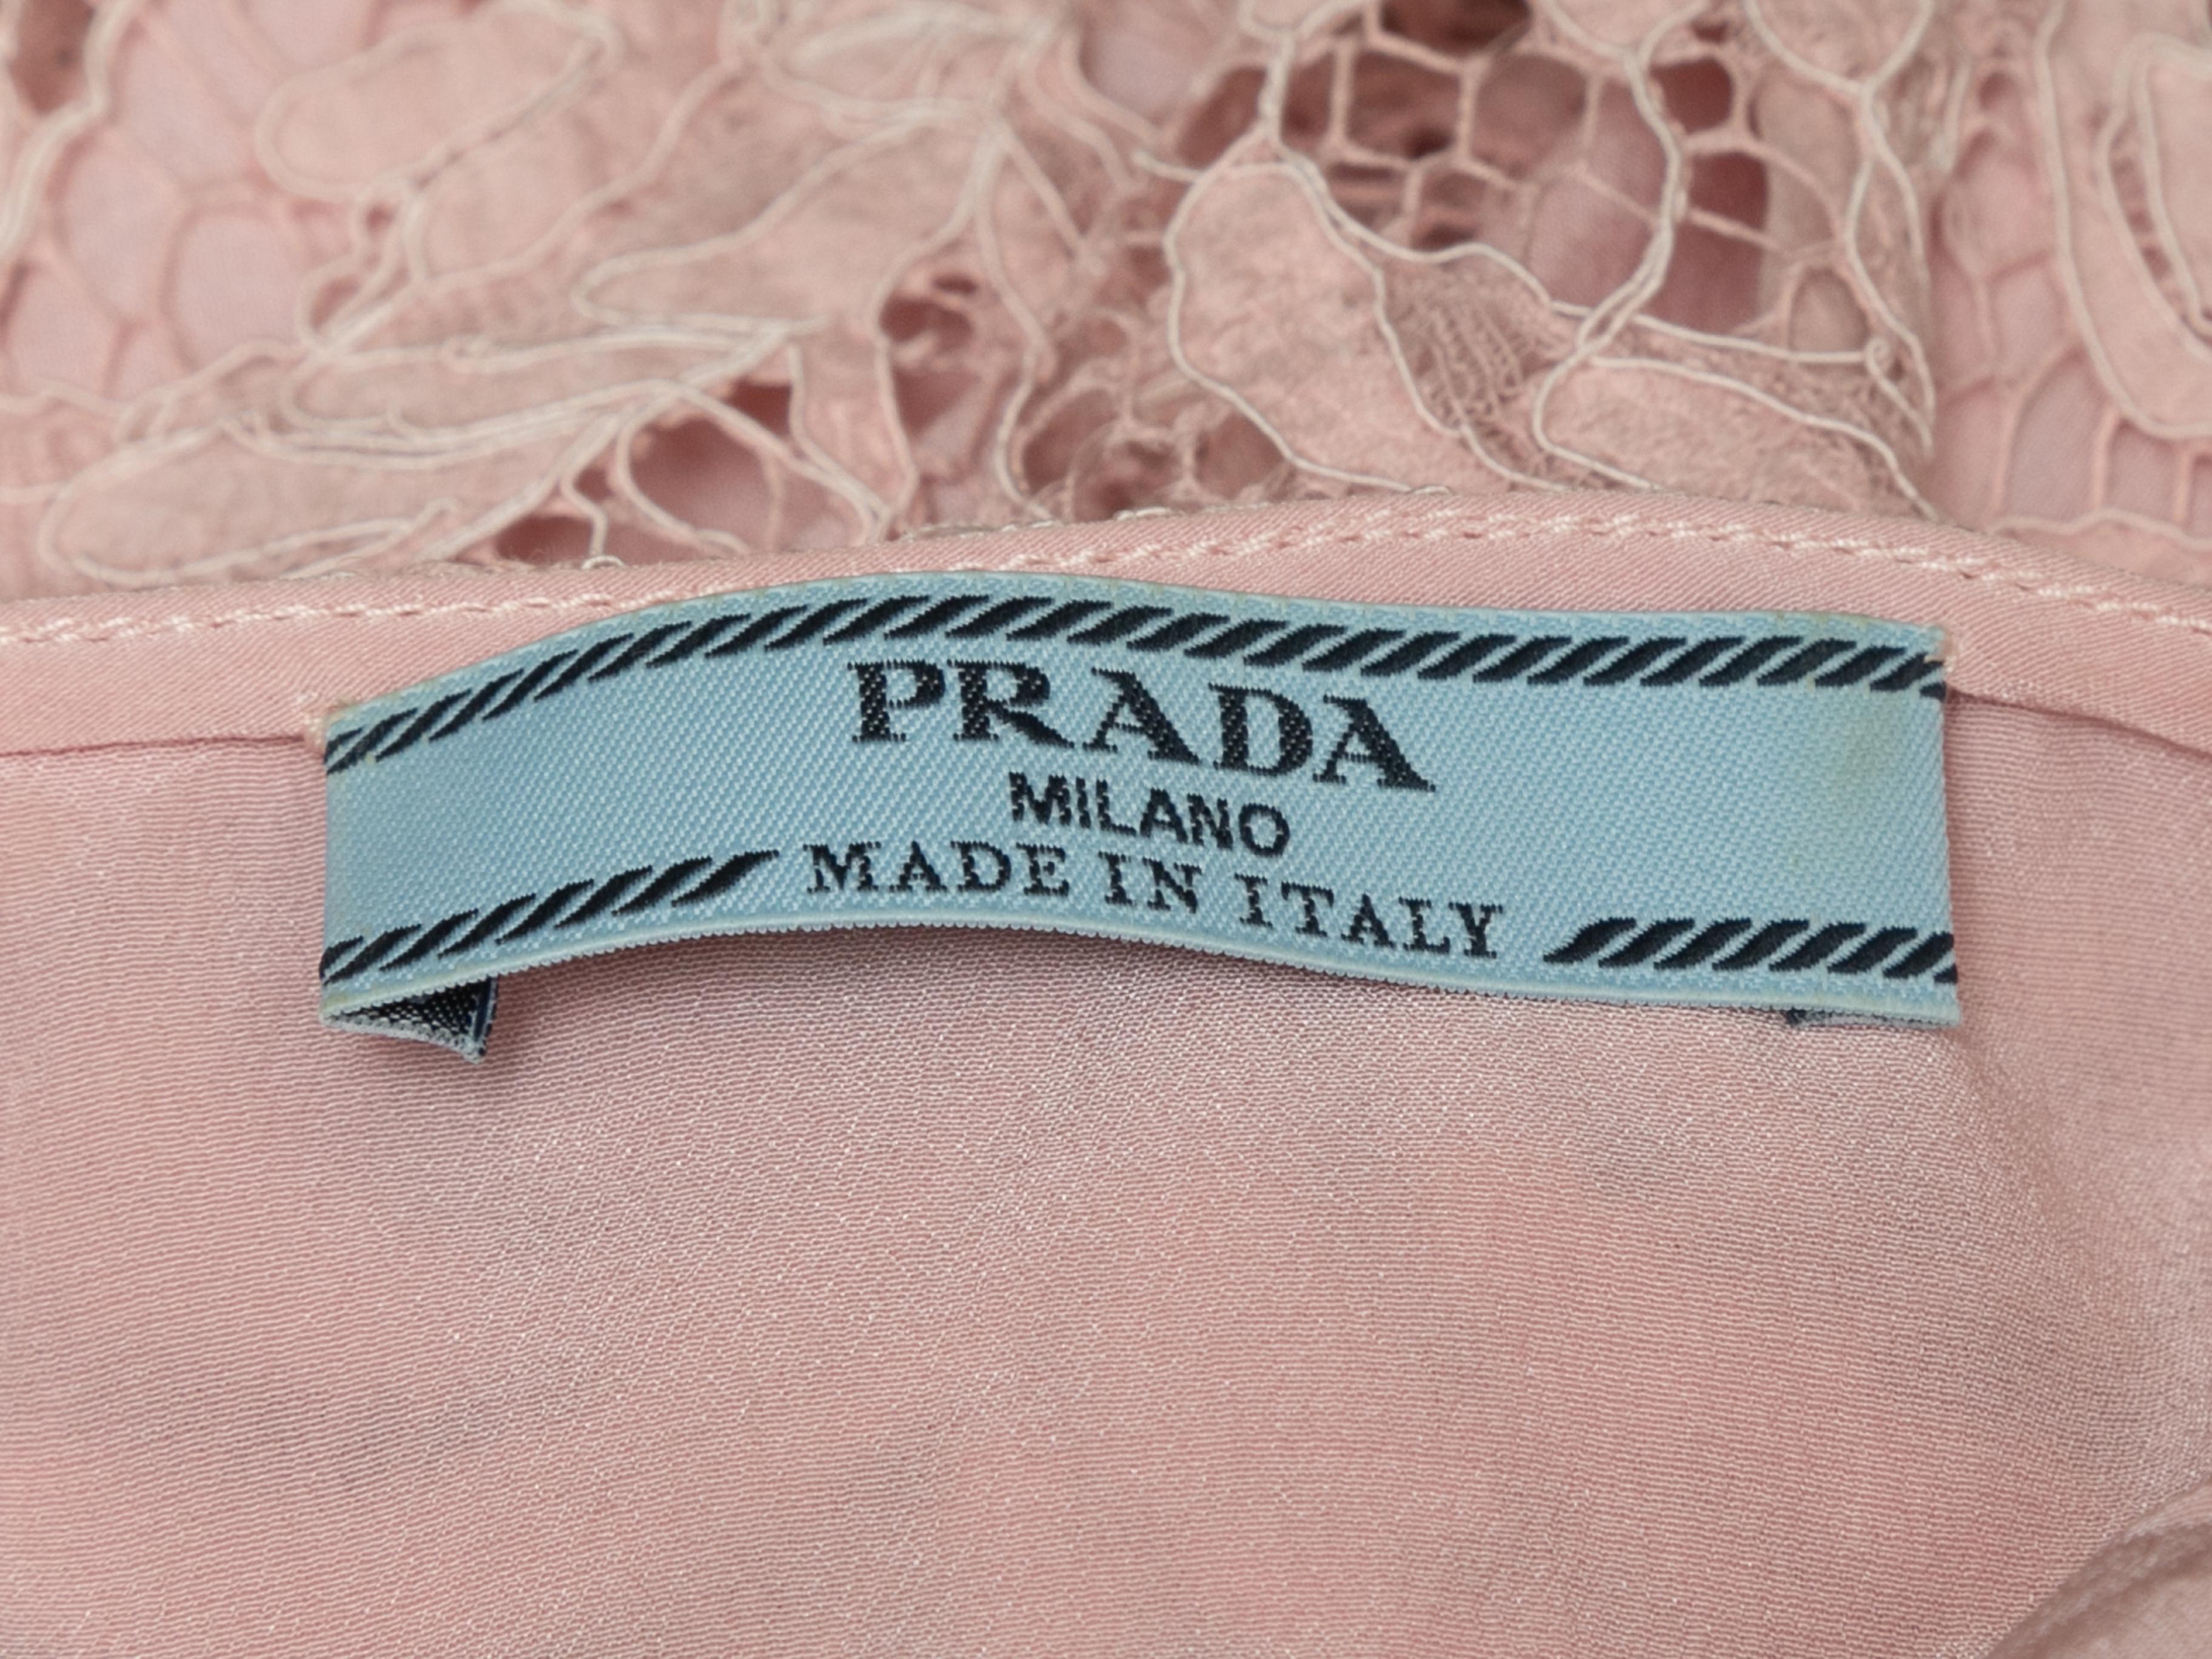 Light pink Chantilly lace sleeveless dress by Prada. Square neckline. Black grosgrain ribbon straps featuring bow tie closures. 32